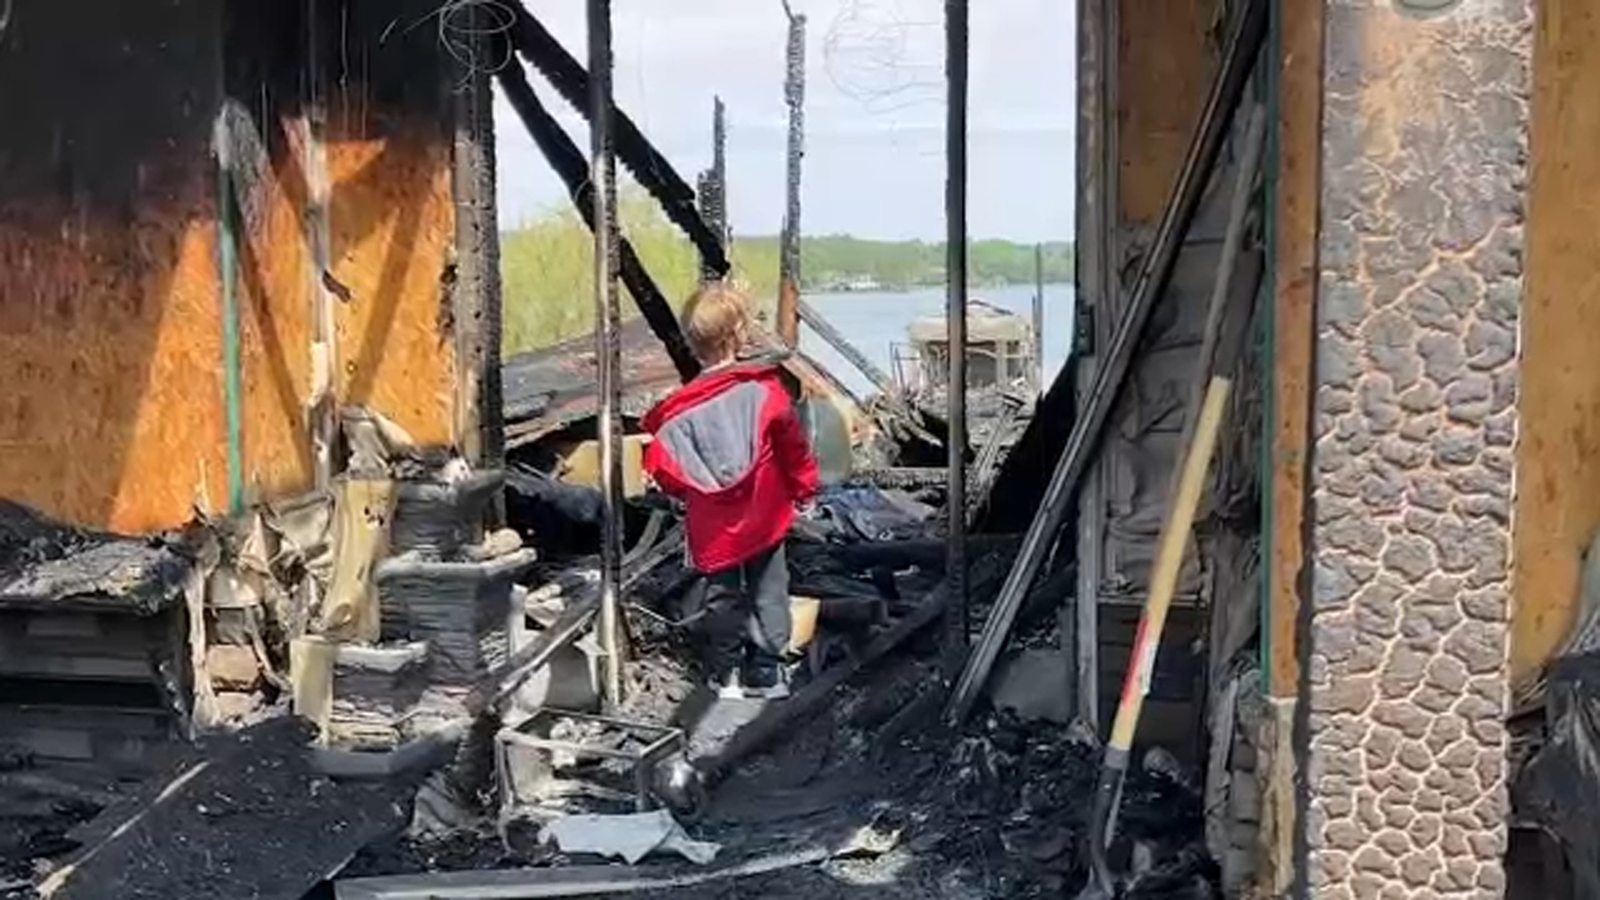 Lake house fire NC | Gold Star wife and sons rebuilding after massive fire destroys their Harnett County home, kill pets [Video]